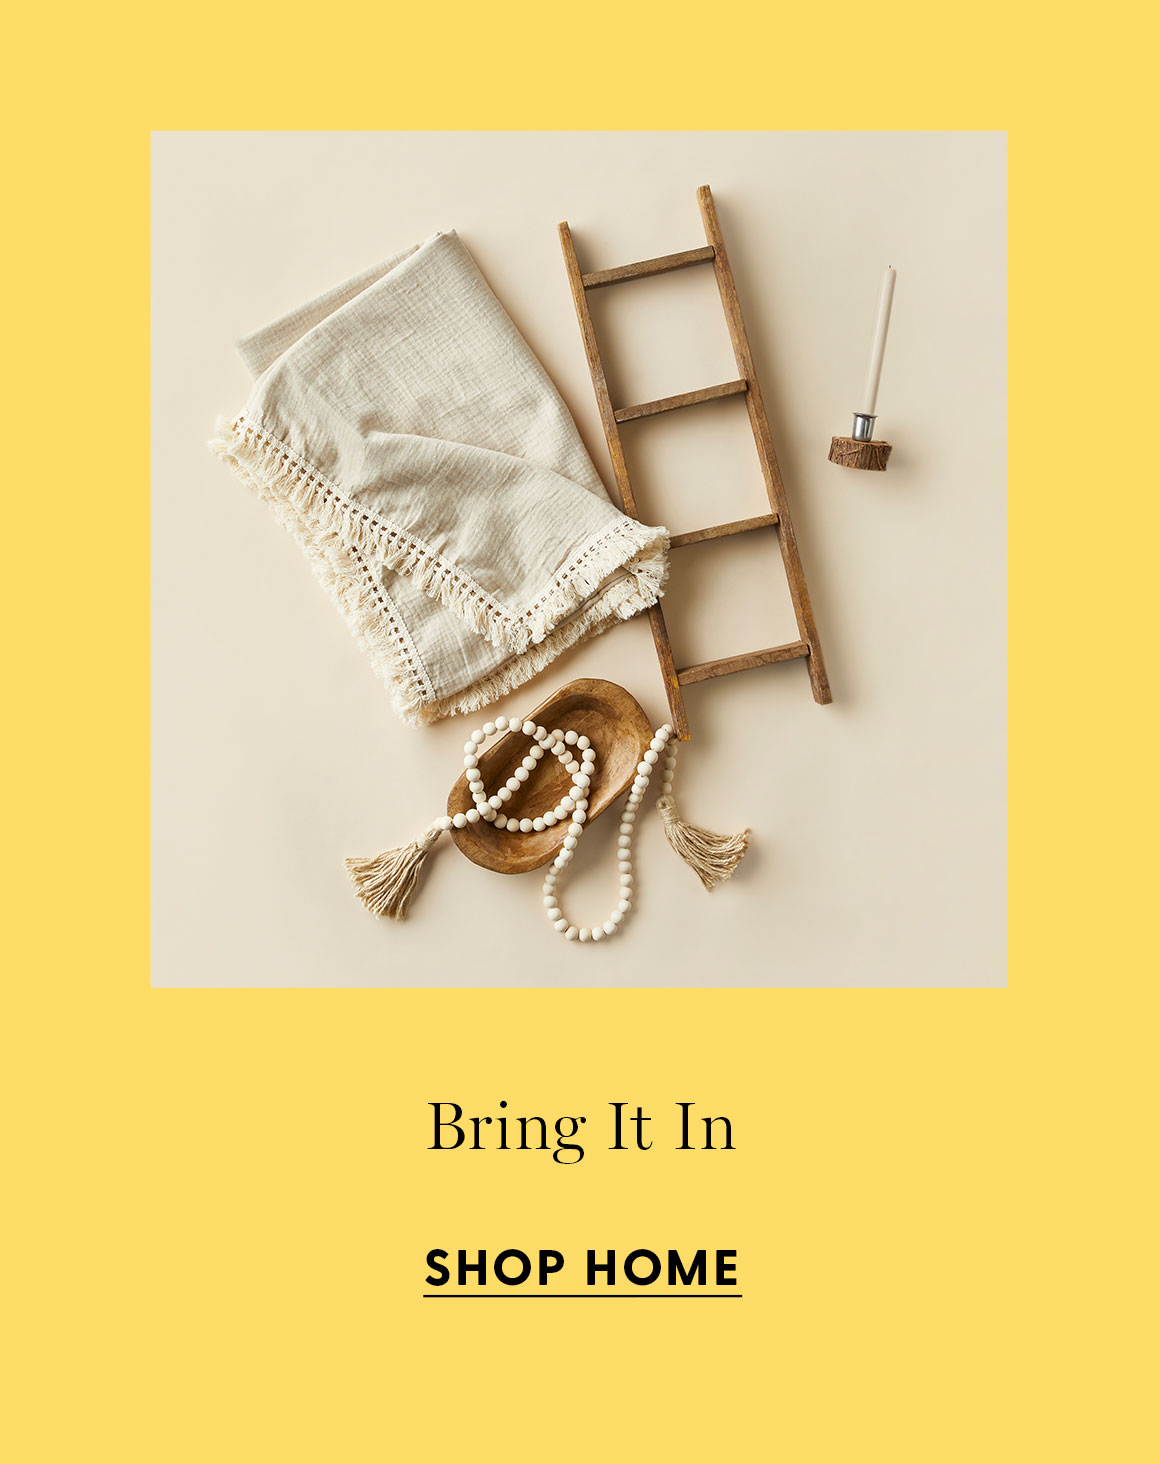 Bring it in. Shop home.